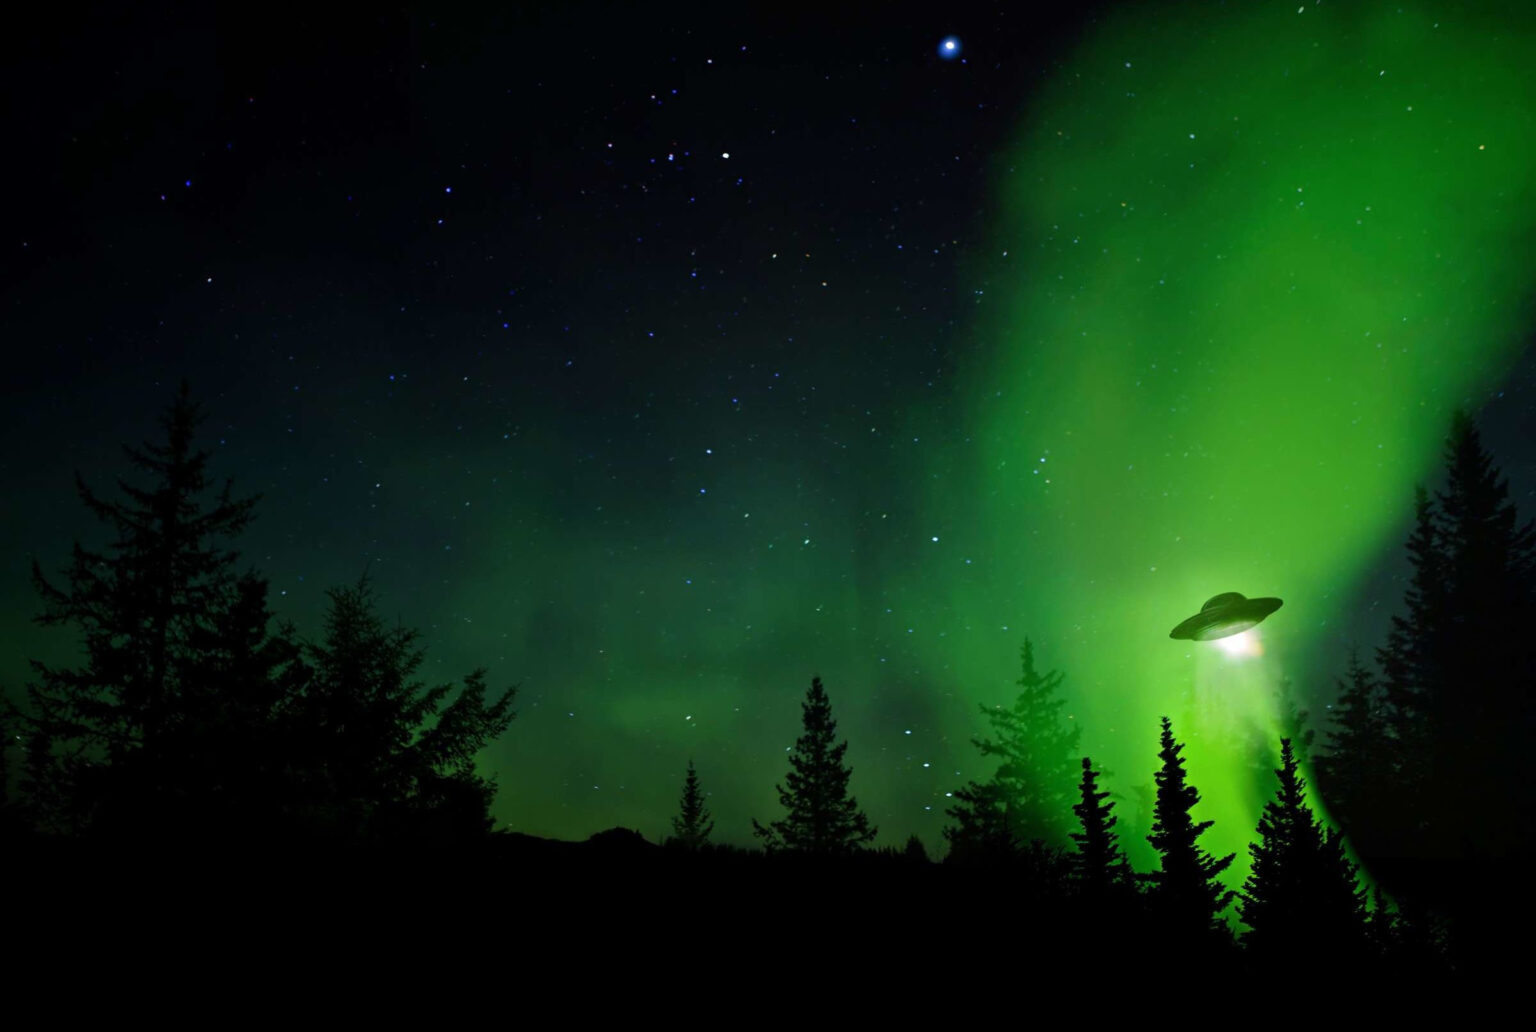 What's up with the recent UFO sightings in Canada? Discover why there's been an uptick in strange activity in the night skies and if it will continue.